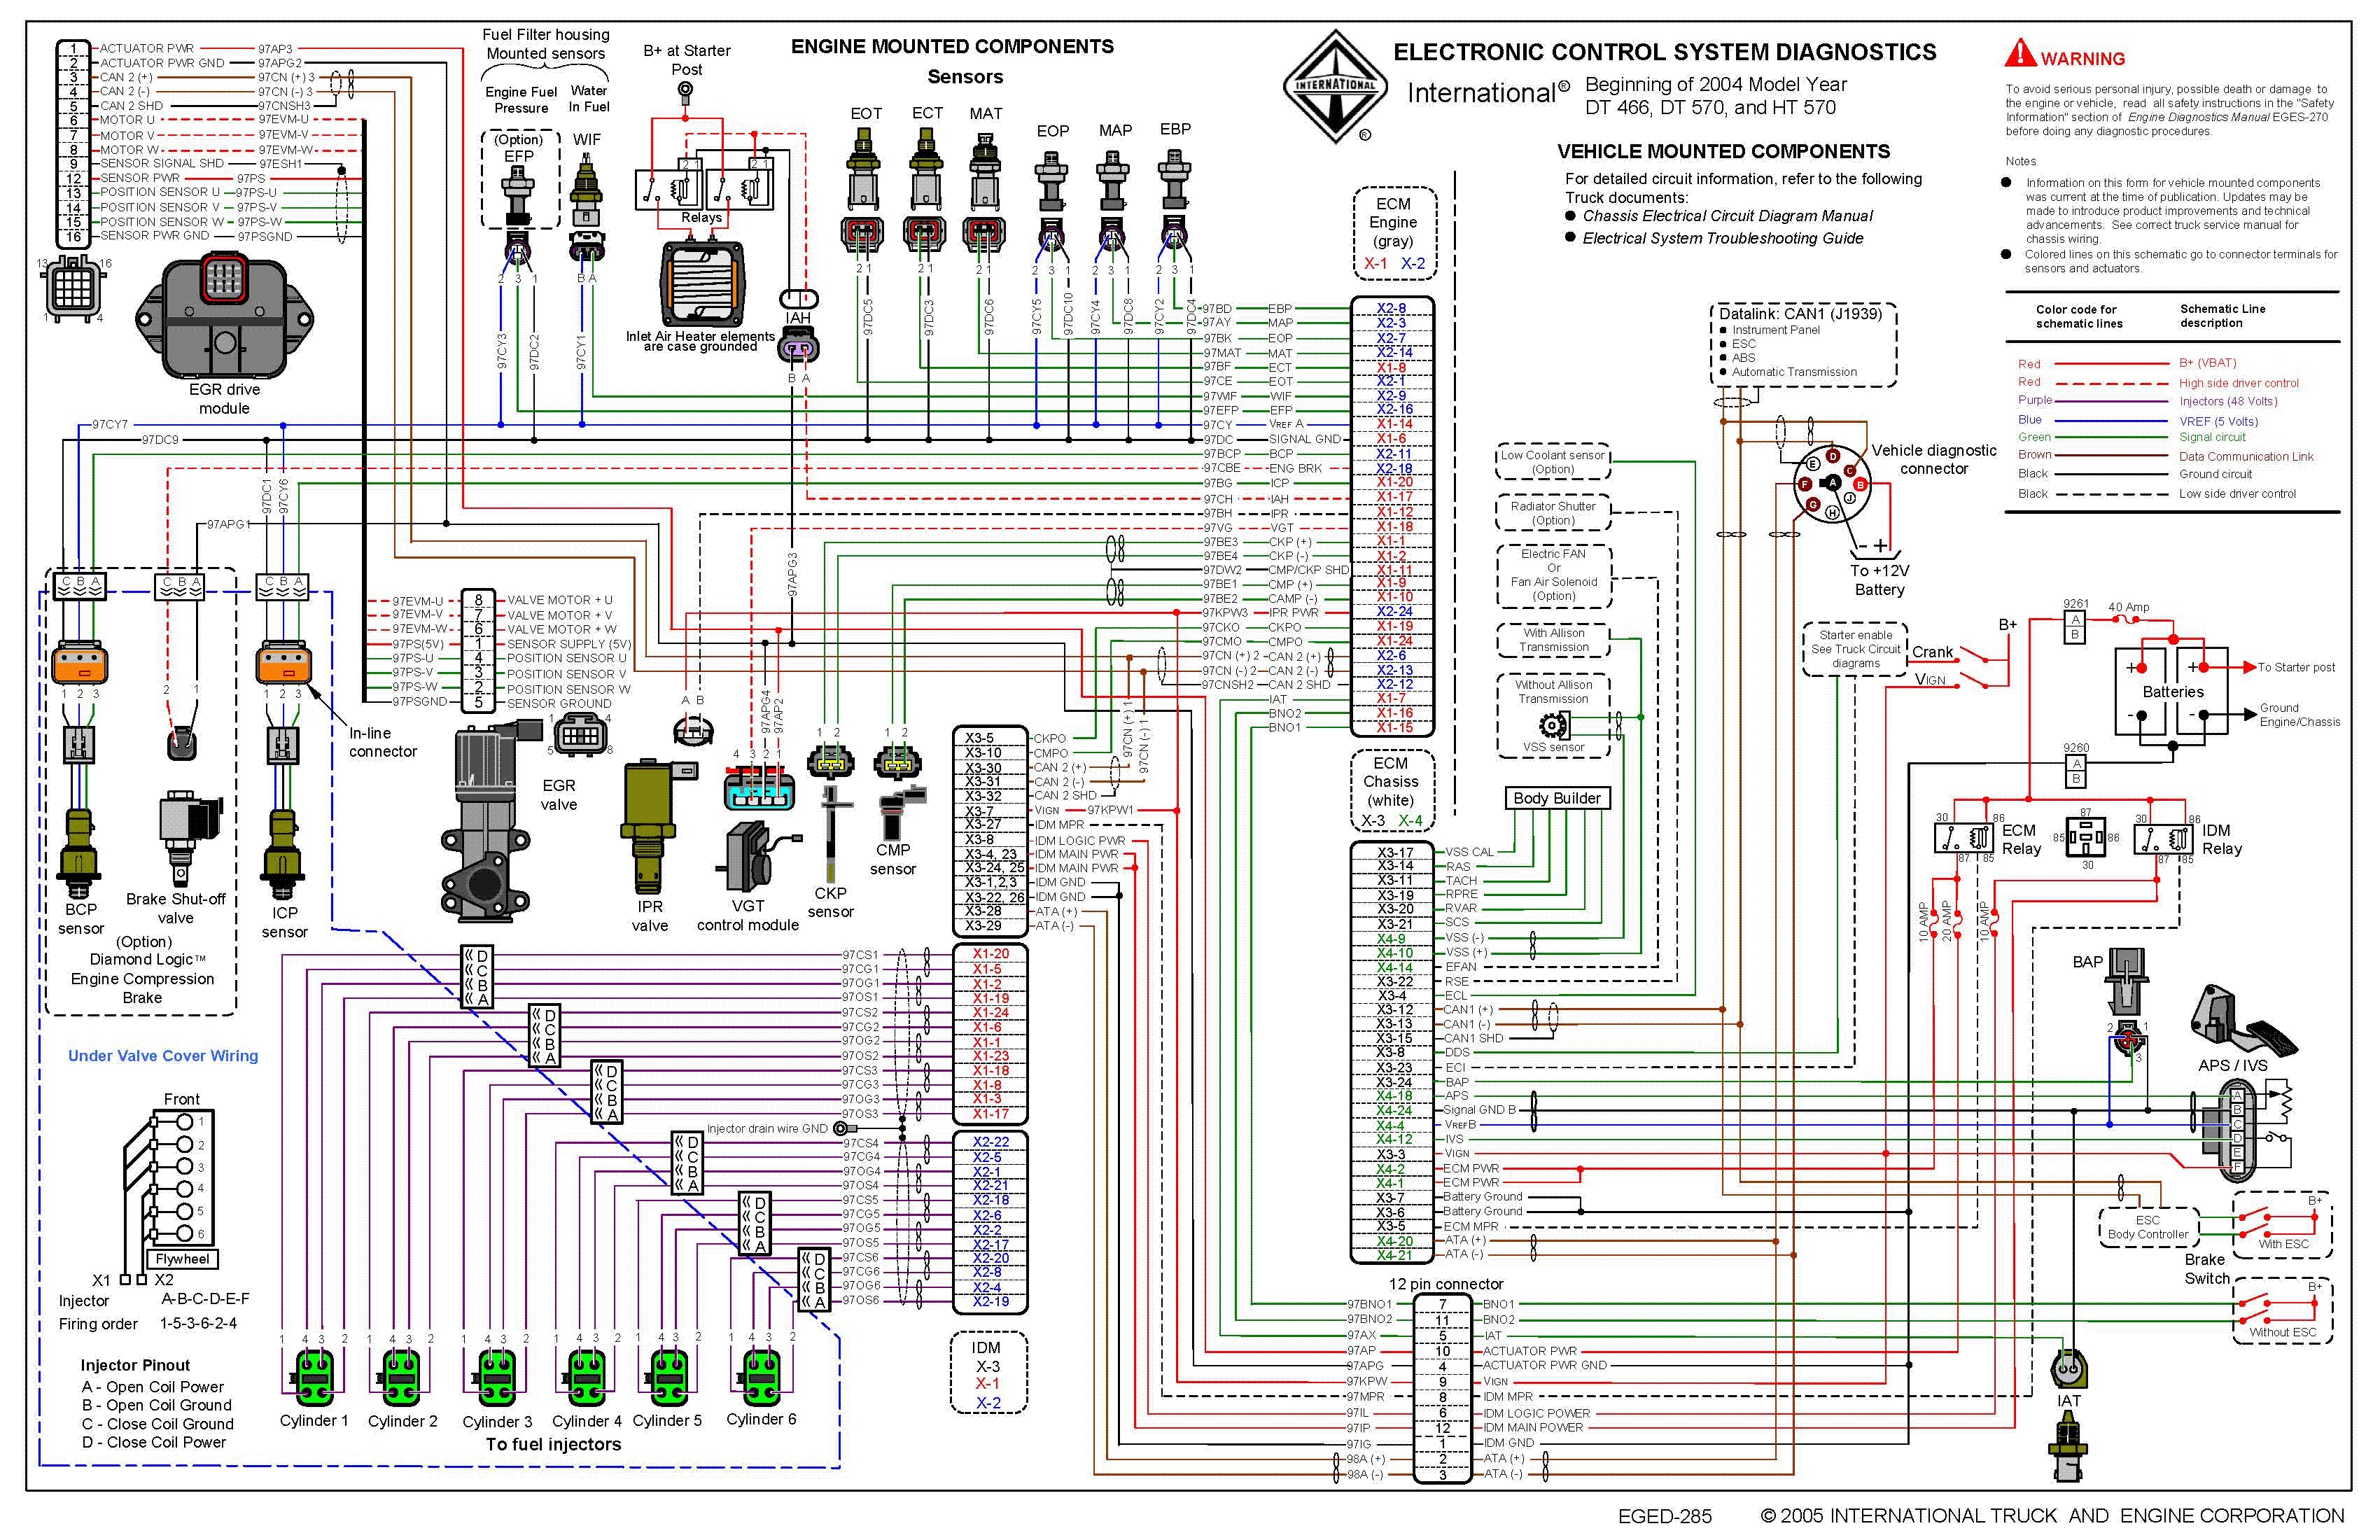 Dt466 Engine Diagram I Need Pin Out for C1 Ecm On Dt466 Engine In International 4900 Of Dt466 Engine Diagram